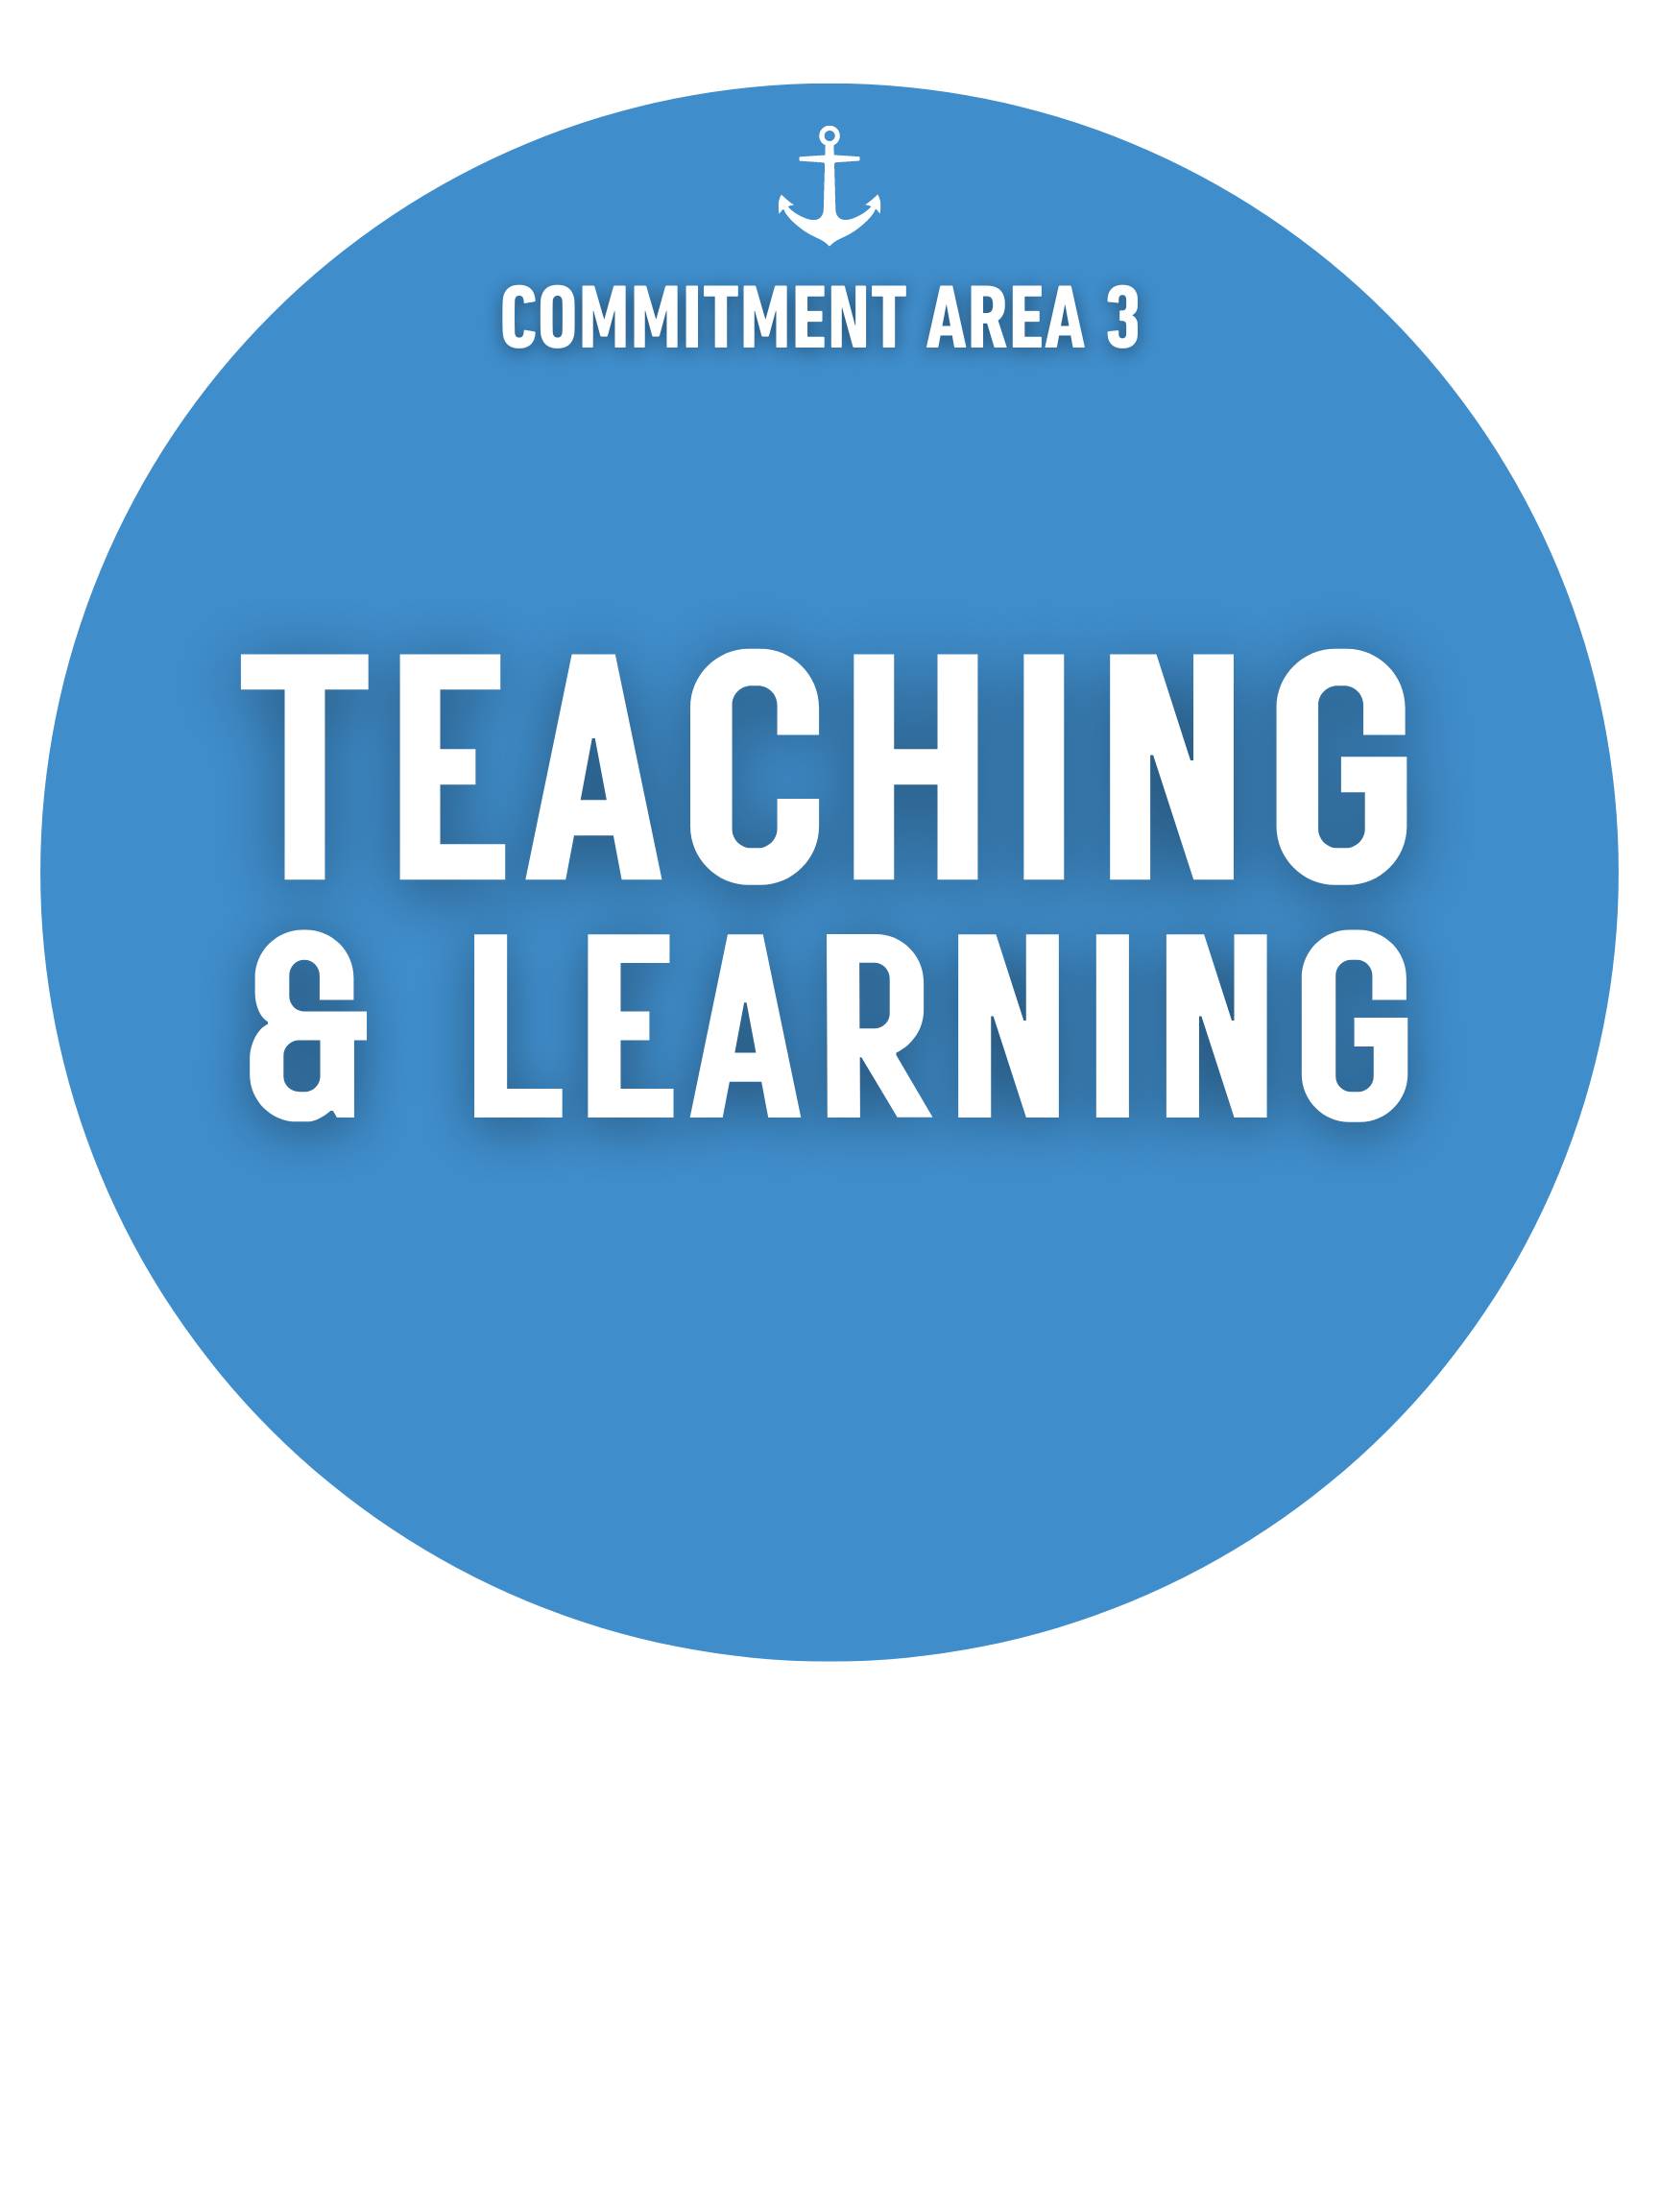 COMMITMENT AREA 3: TEACHING & LEARNING